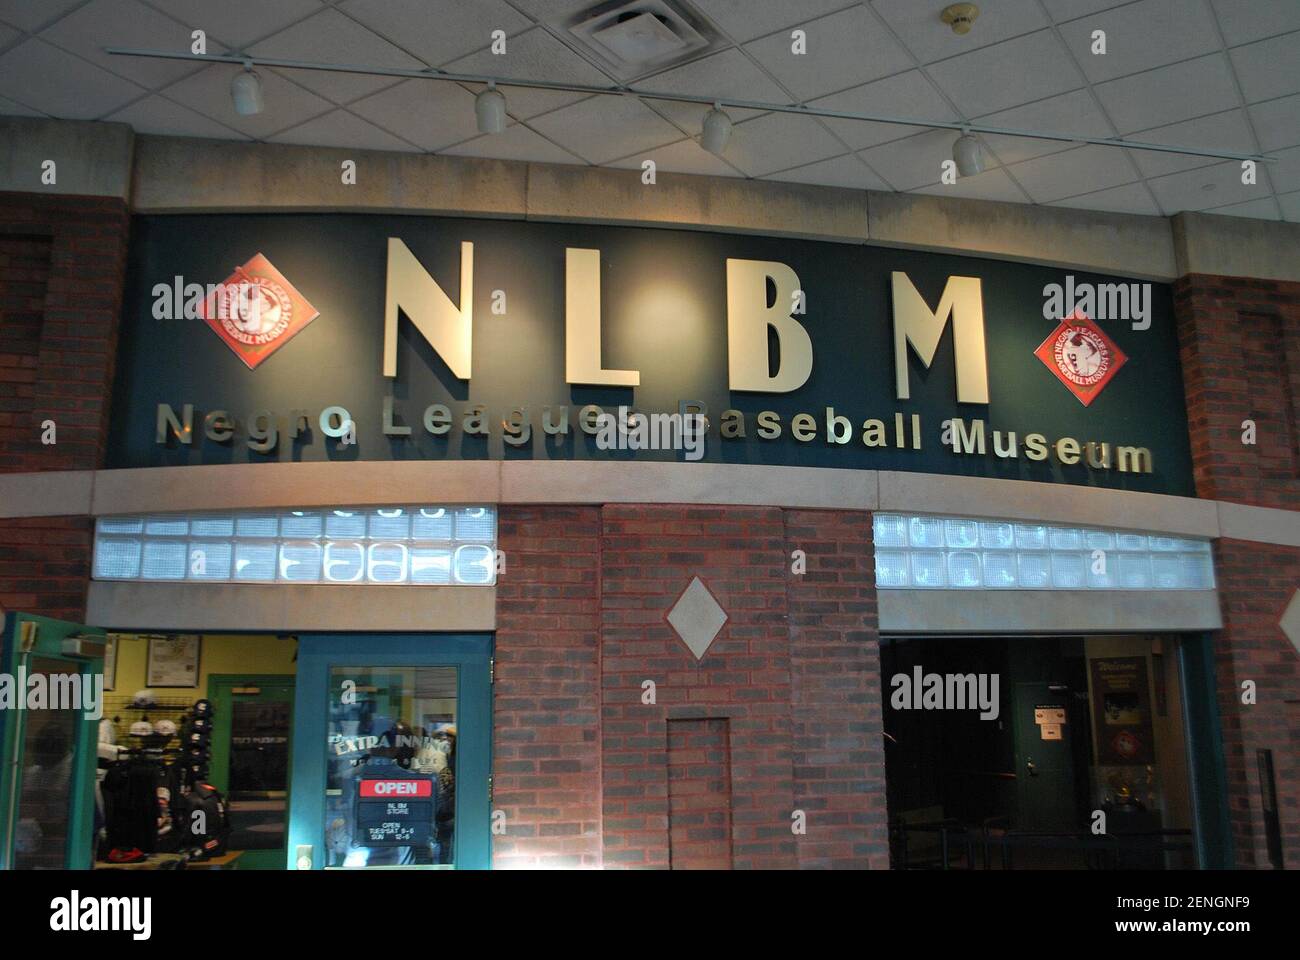 The Negro Leagues Baseball Museum in Kansas City, Mo., is dedicated to preserving the history of African-American baseball, when black players were prohibited from joining the major league teams. (Photo by Mark Taylor/Chicago Tribune/TNS/Sipa USA) Stock Photo